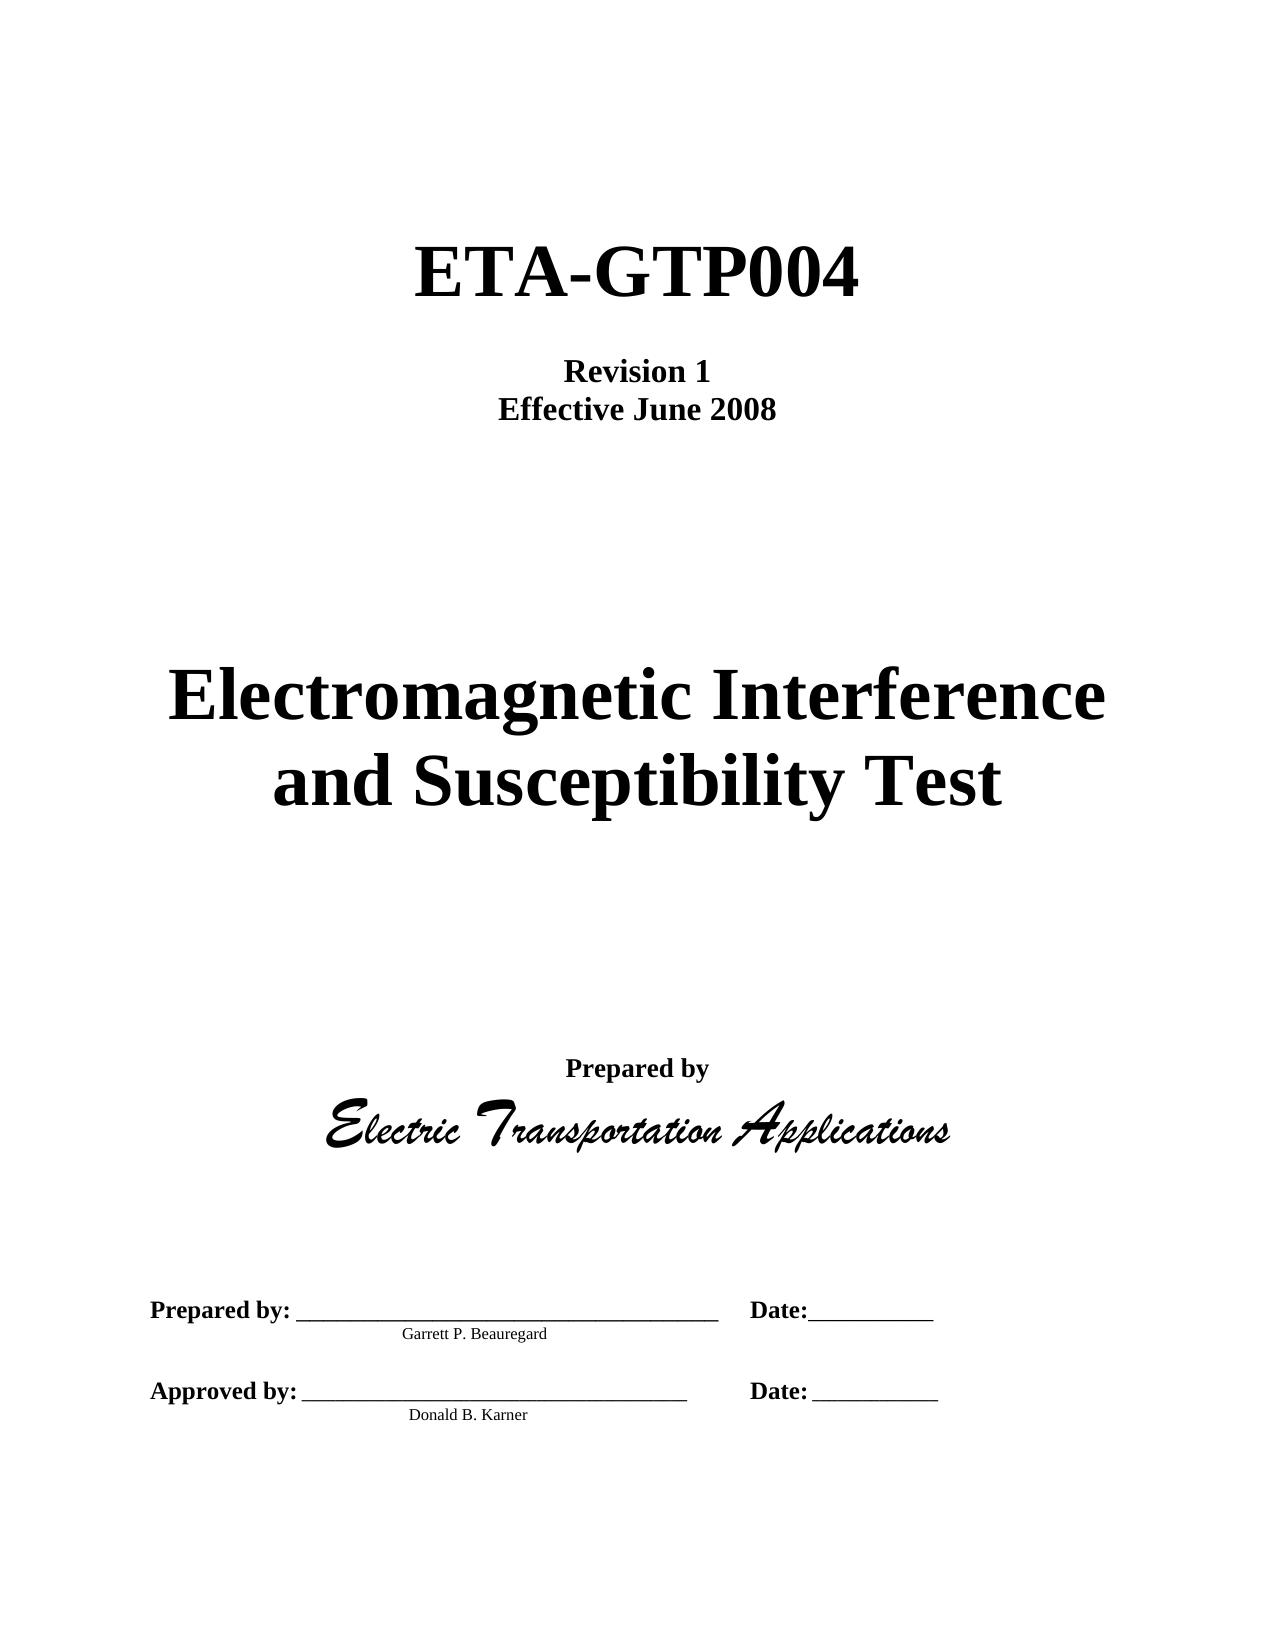 Electromagnetic Interference and Susceptibility Test